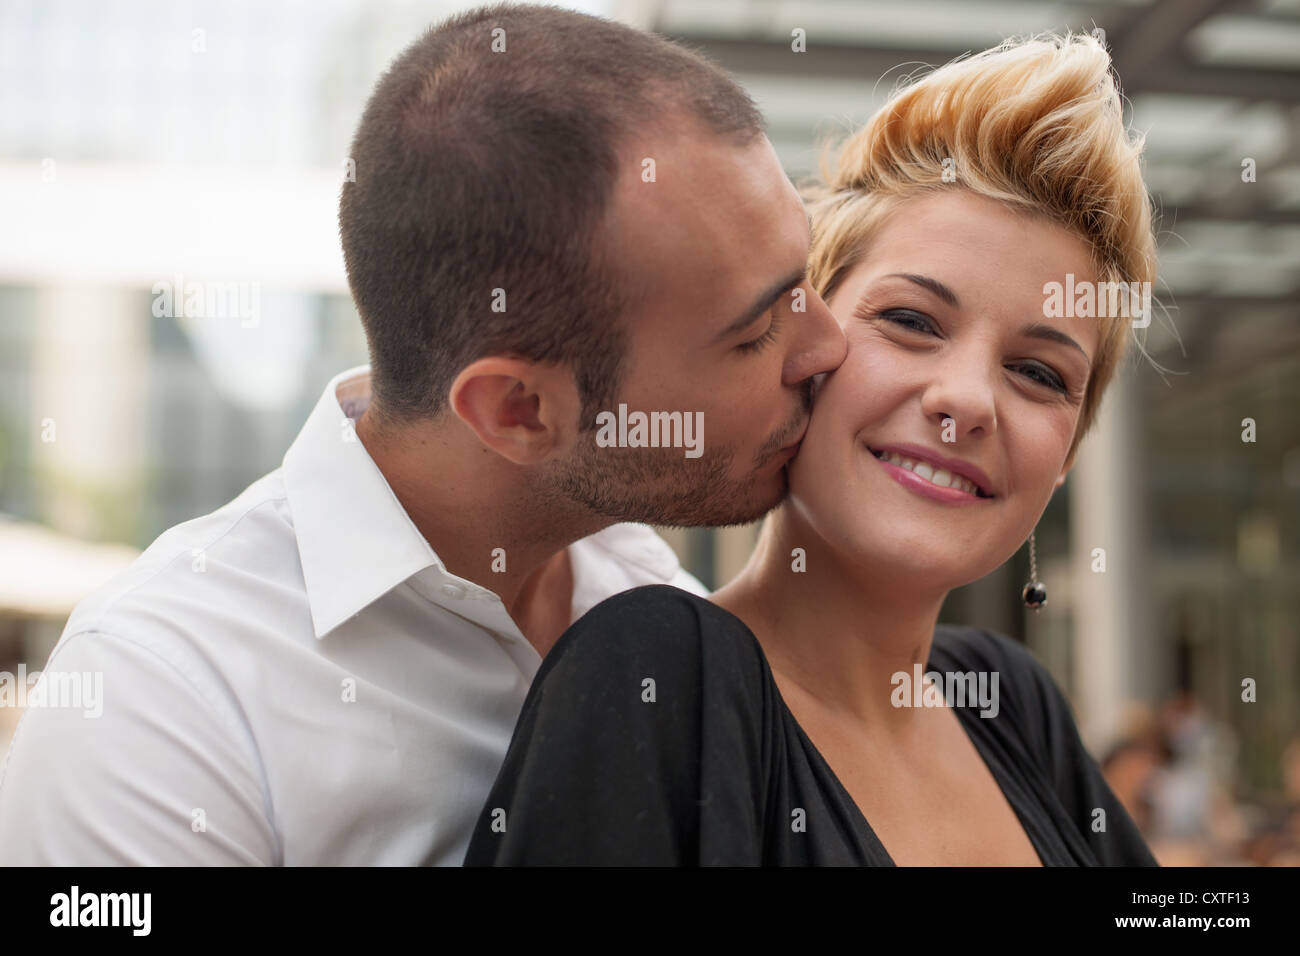 Smiling couple kissing outdoors Stock Photo